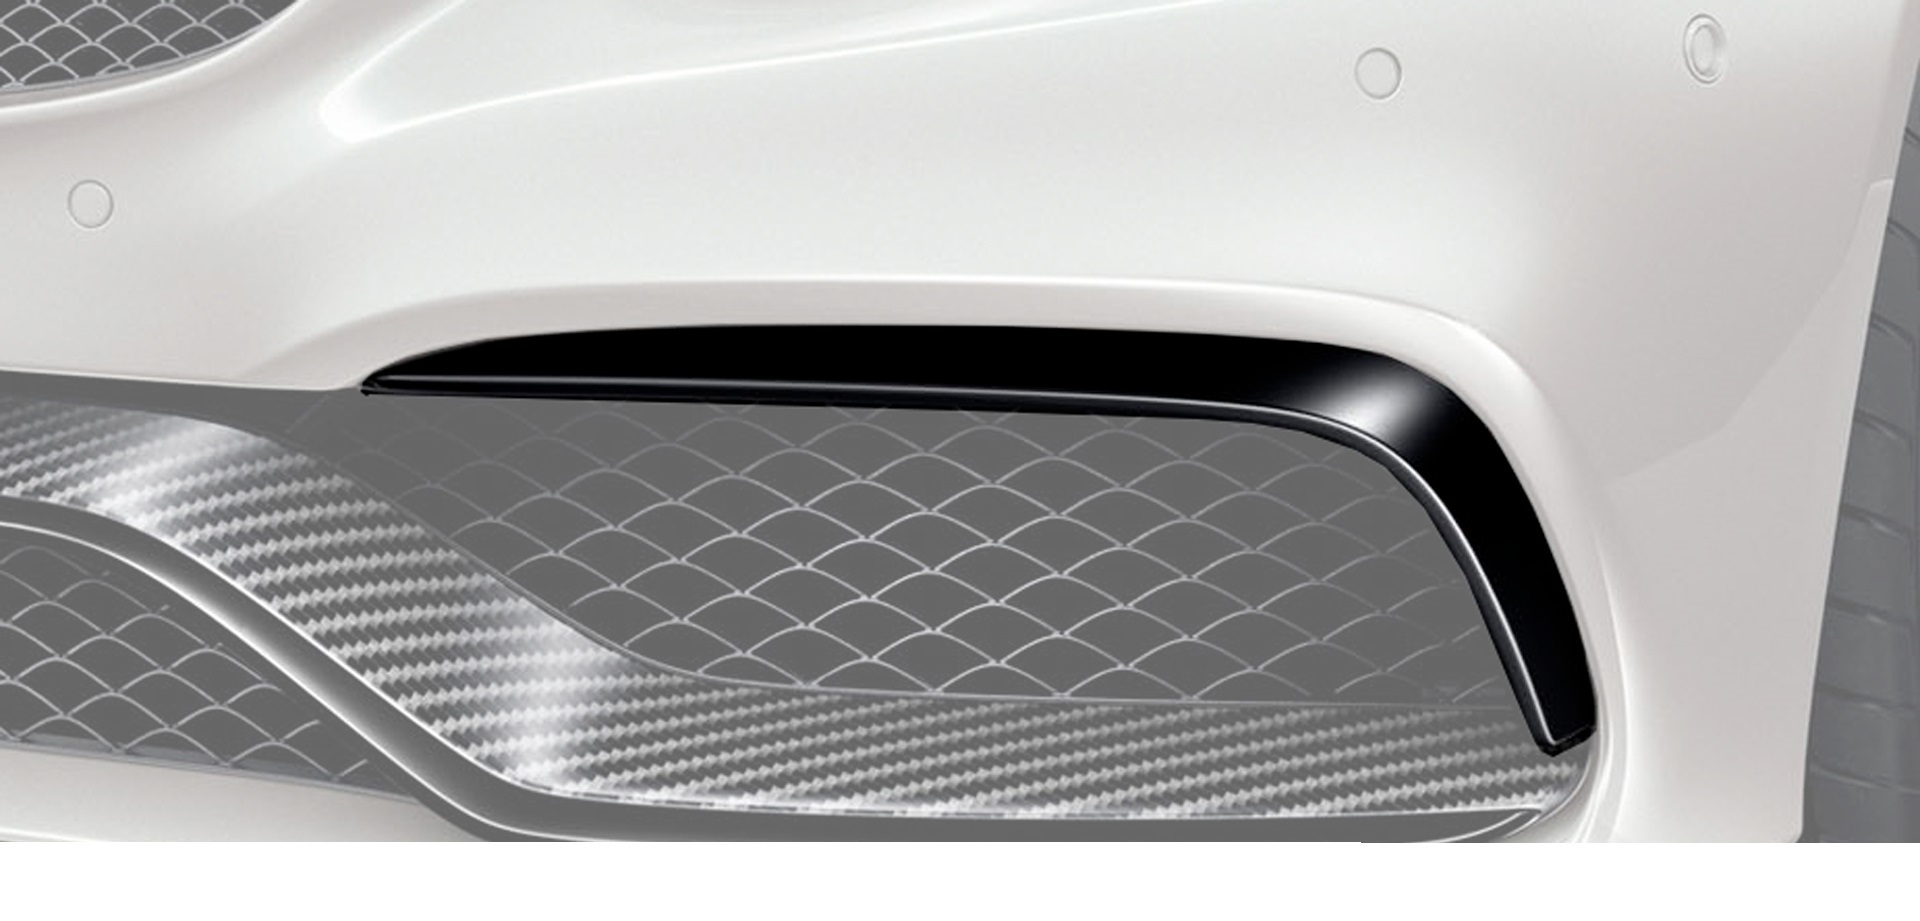 Hodoor Performance Carbon fiber trims on the air intakes of the front bumper AMG Style for Mercedes C-class W205